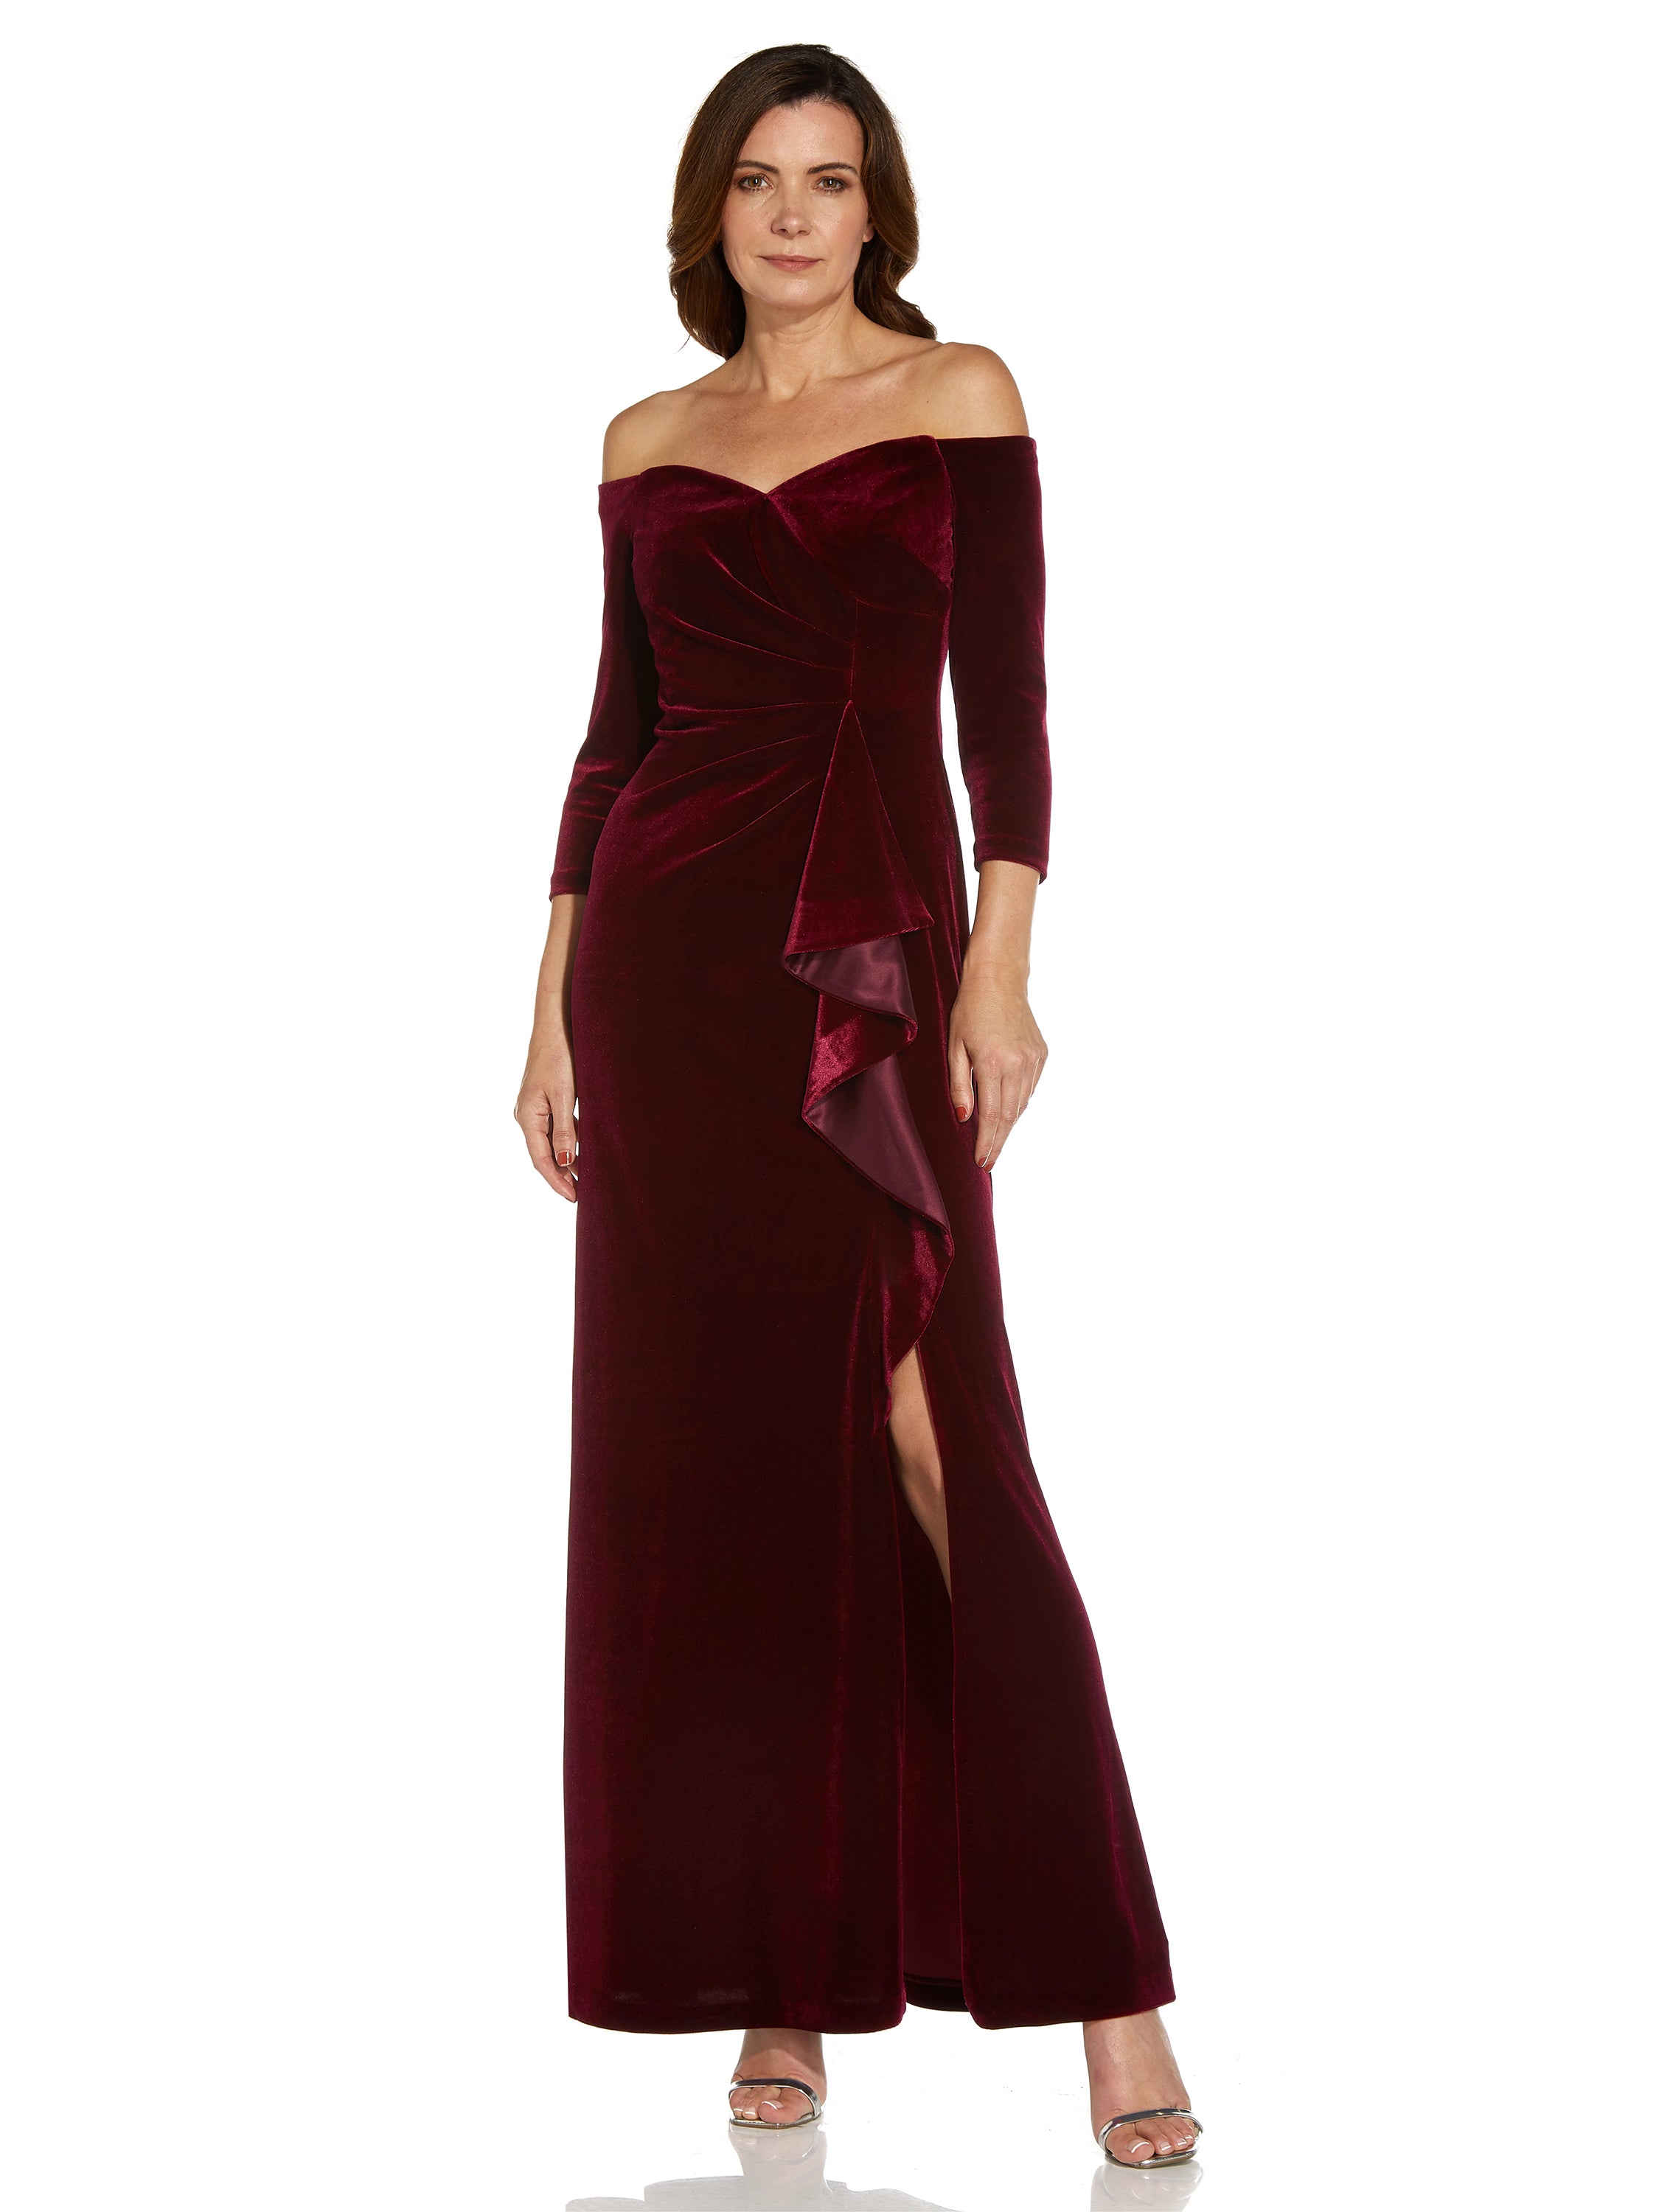 Lord Taylor Evening Dresses,Lord and Taylor Dresses for Women ,Lord and  Taylor Mother of Bride Dresses,Lord Tayl…